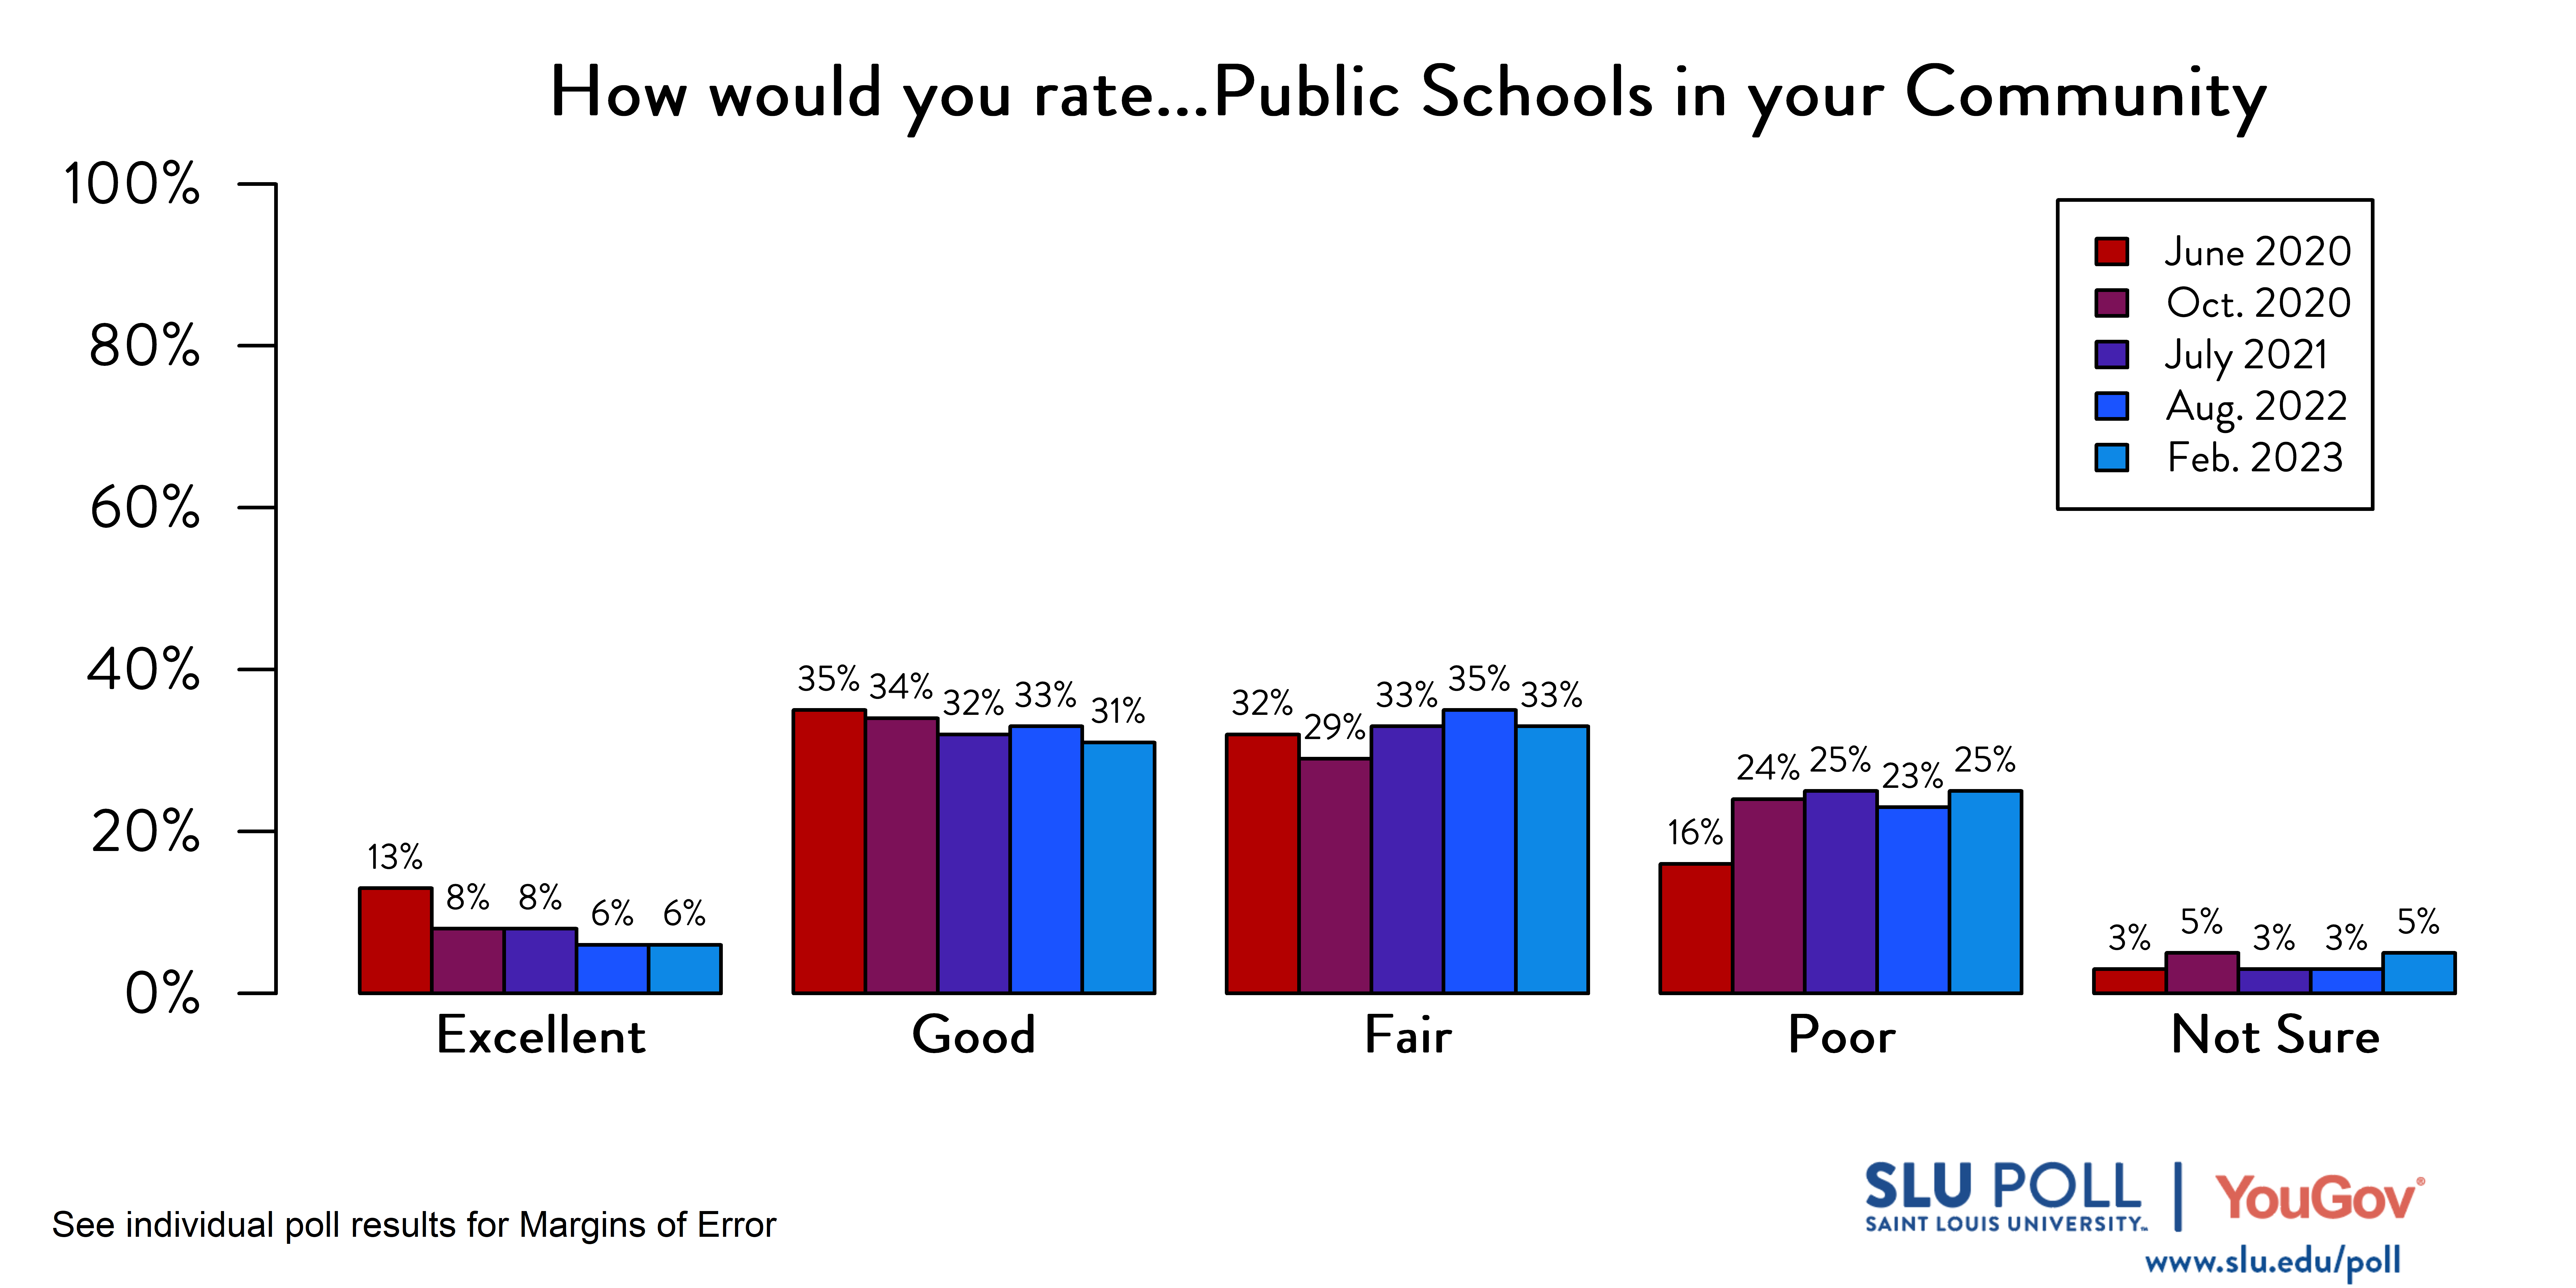 Likely voters' responses to 'How would you rate the condition of the following: Public Schools in your community?'. June 2020 Voter Responses 13% Excellent, 35% Good, 32% Fair, 16% Poor, and 3% Not Sure. October 2020 Voter Responses: 8% Excellent, 34% Good, 29% Fair, 24% Poor, and 5% Not sure. July 2021 Voter Responses: 8% Excellent, 32% Good, 33% Fair, 25% Poor, and 3% Not sure. August 2022 Voter Responses: 6% Excellent, 33% Good, 35% Fair, 23% Poor, and 3% Not sure. February 2023 Voter Responses: 6% Excellent, 31% Good, 33% Fair, 25% Poor, and 5% Not sure.